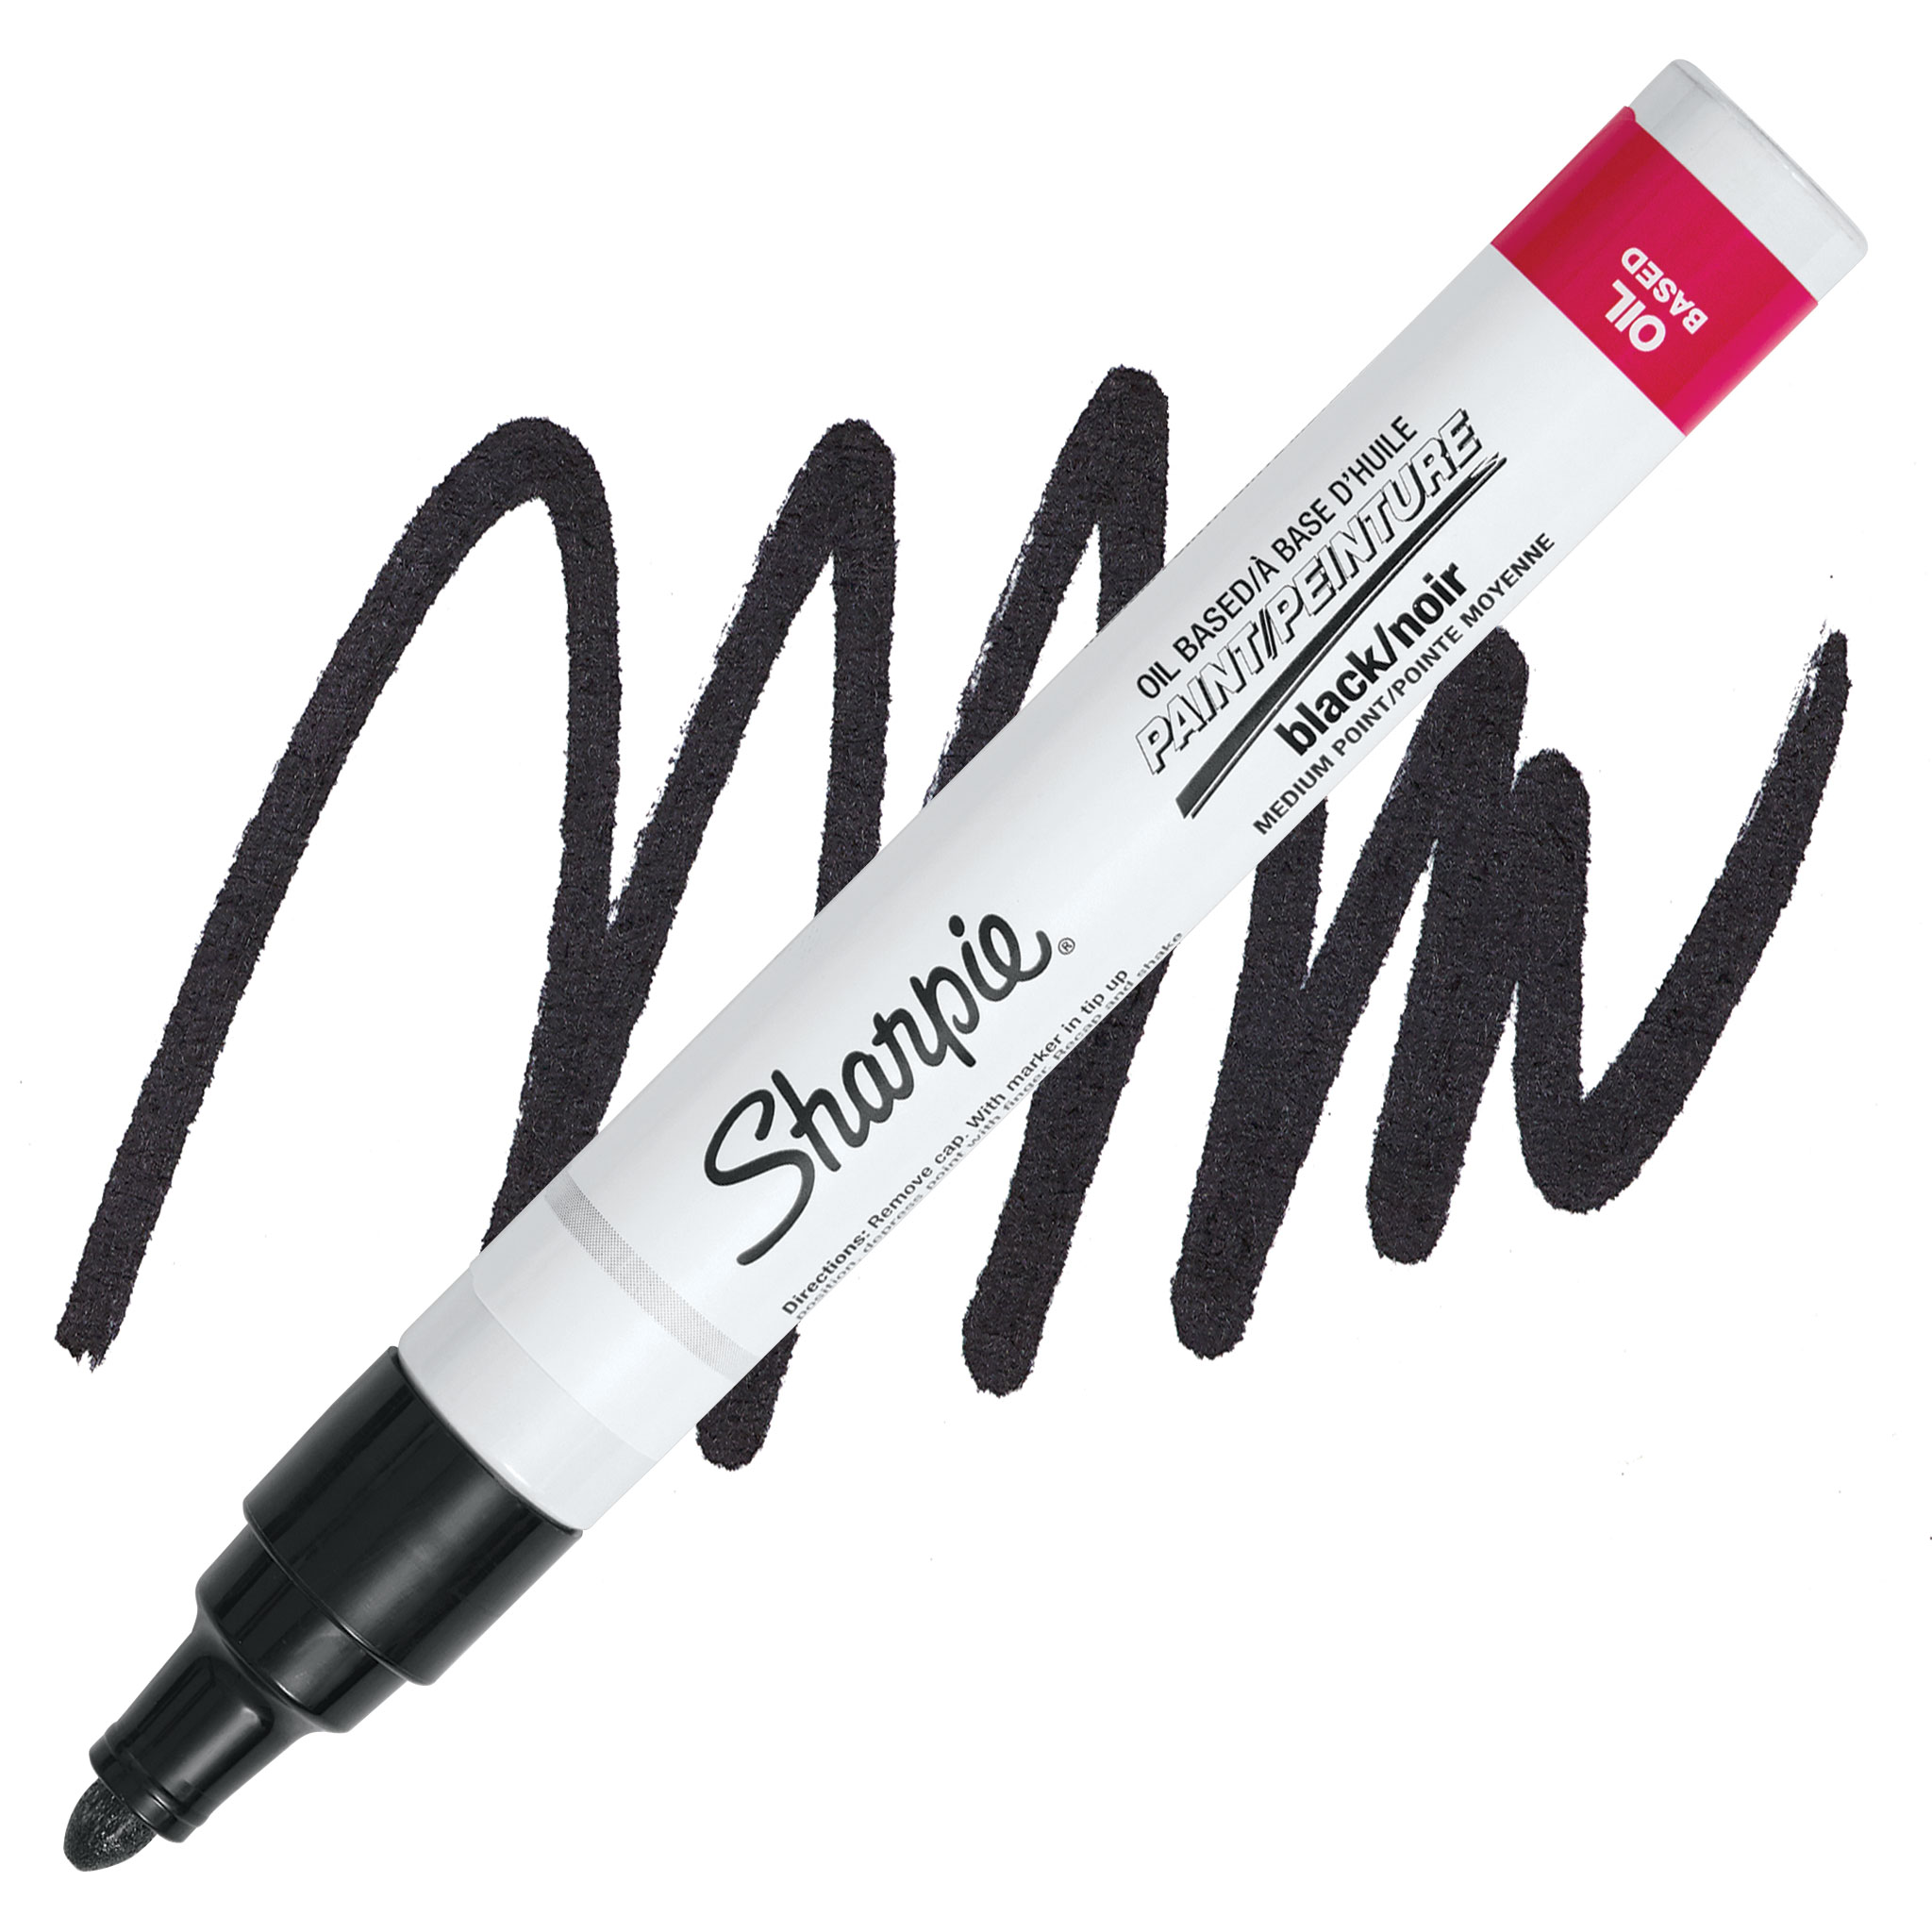 Red Fine Tip Oil Based Paint Marker by Top Notch